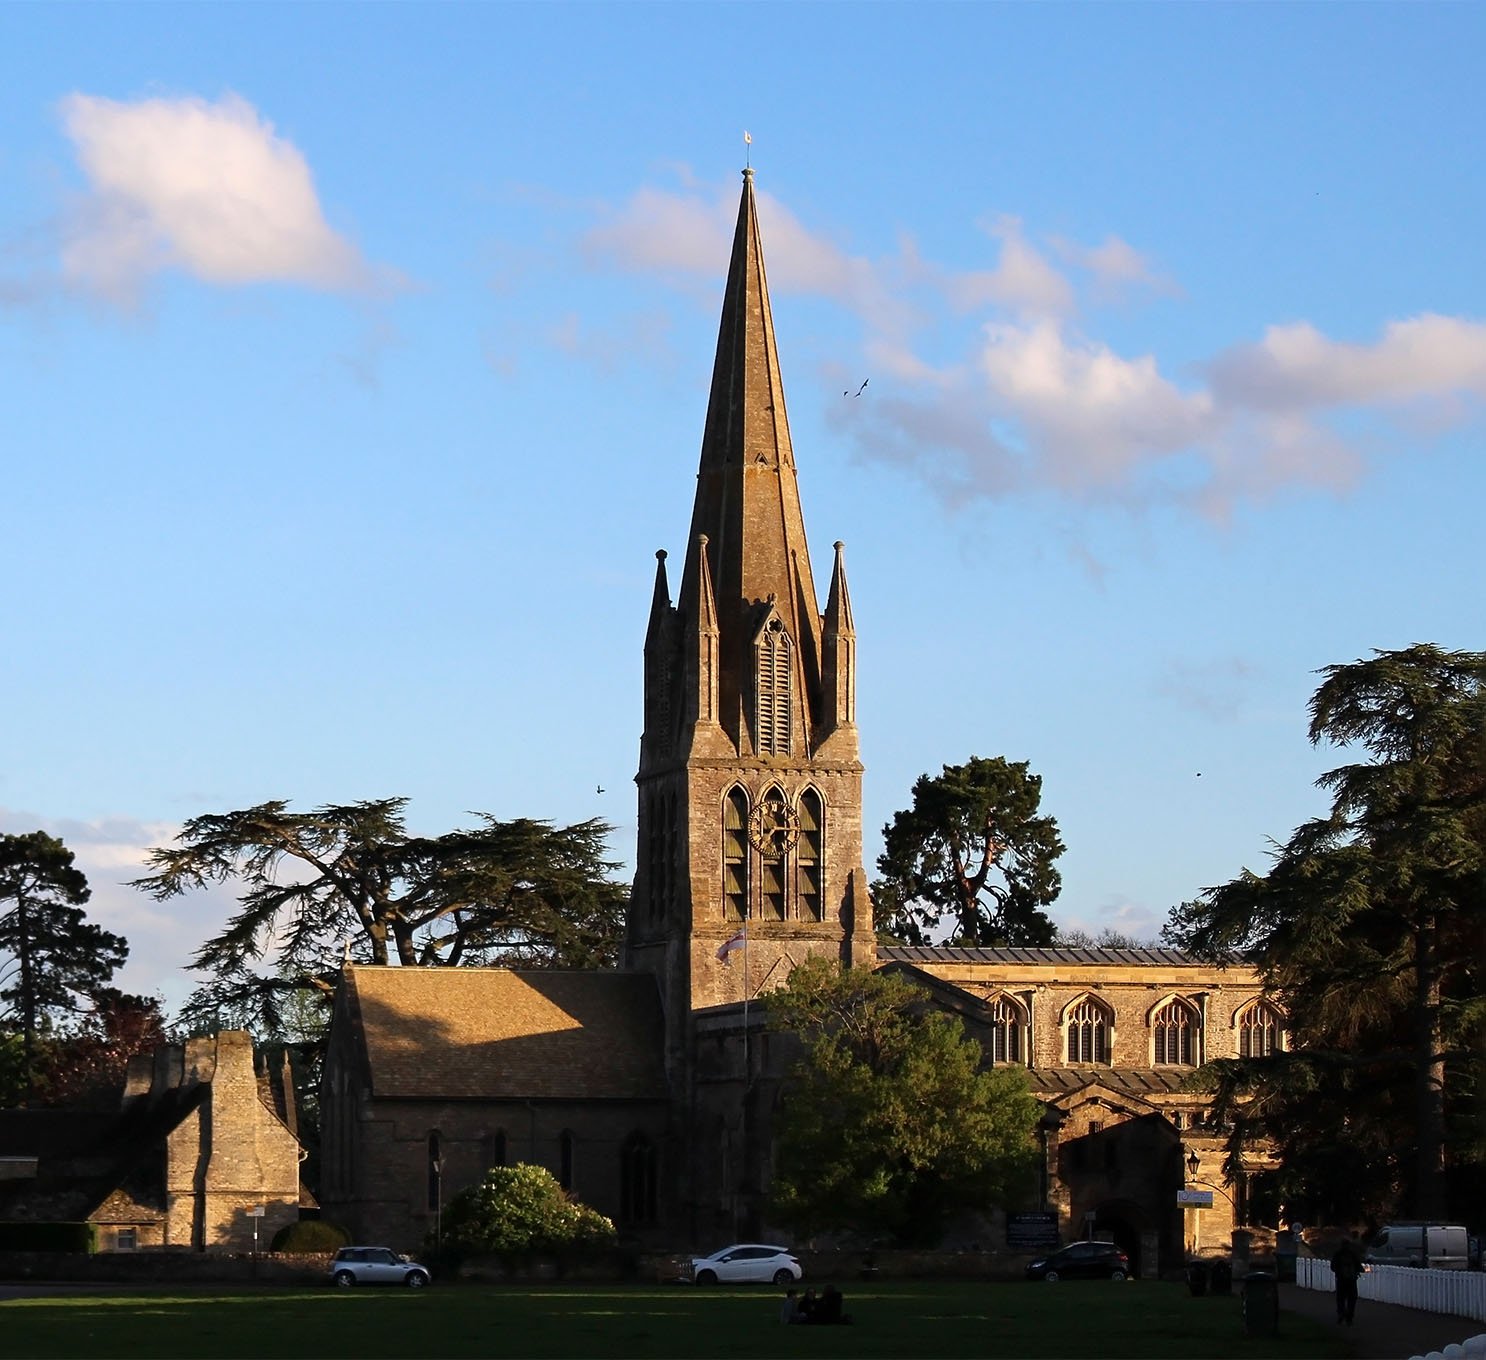 View of St. Mary's on the Green in Witney, England.